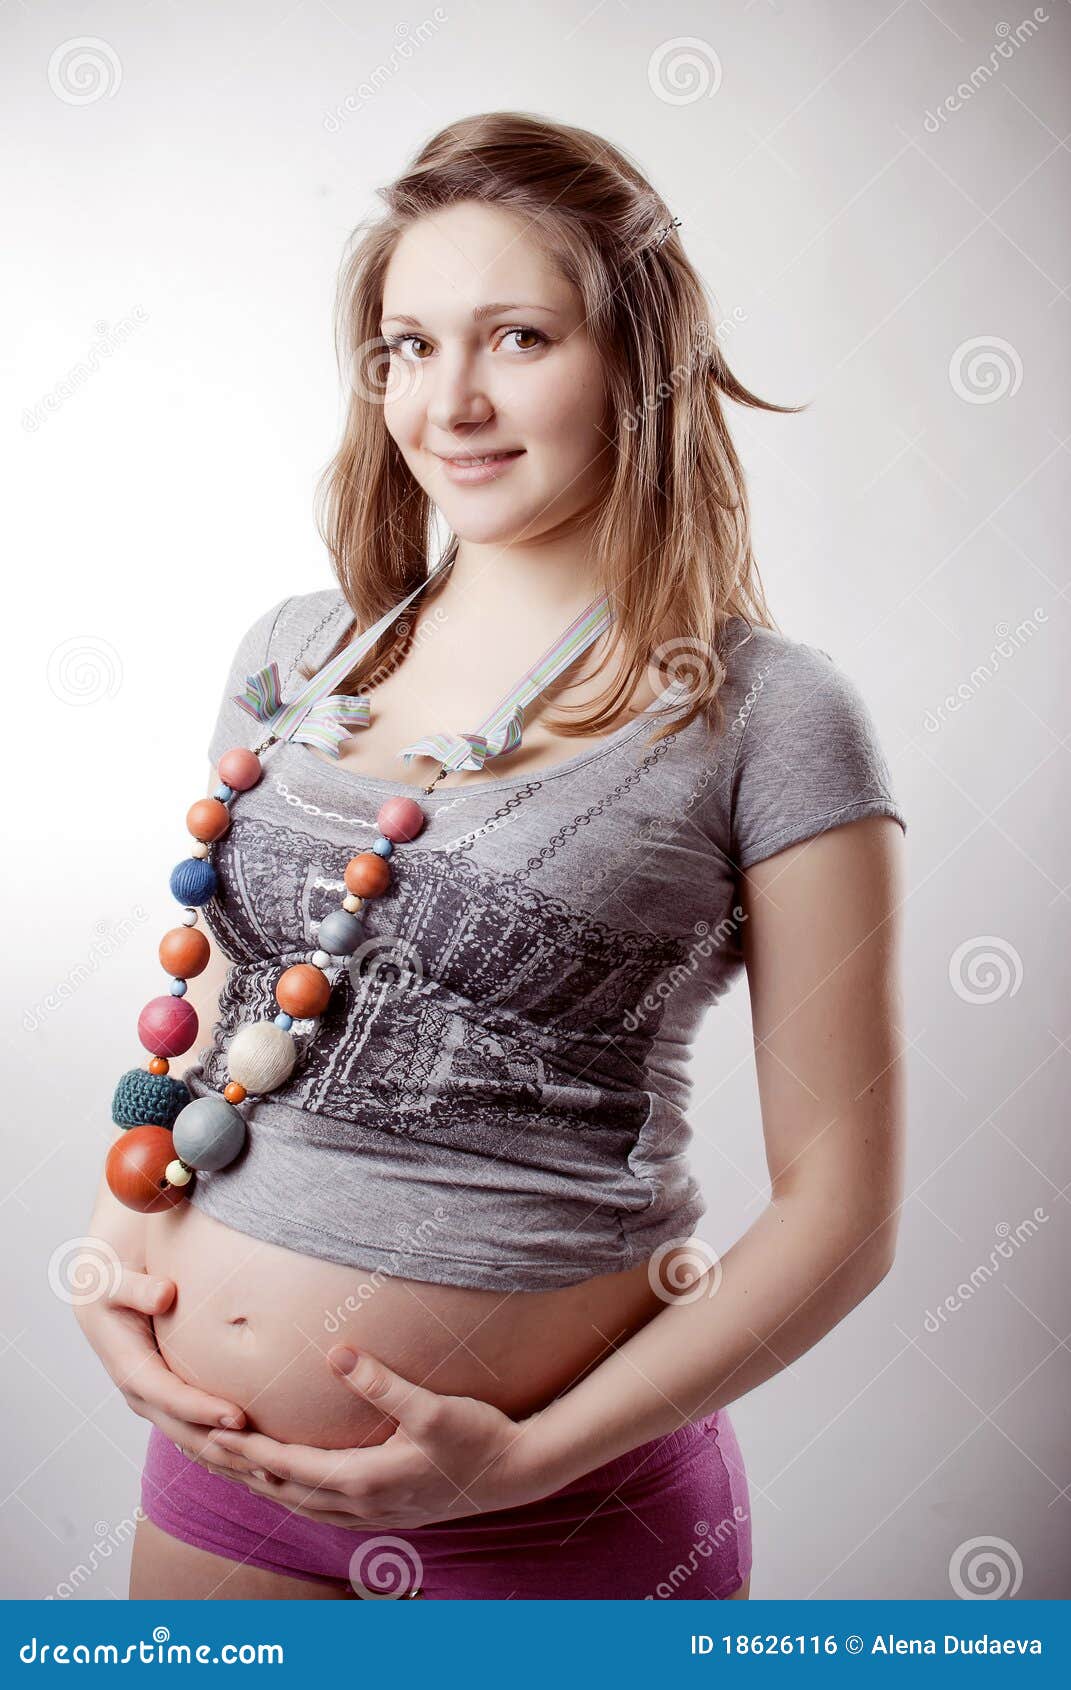 Funny pregnant woman stock photo. Image of laughing, maternal - 18626116